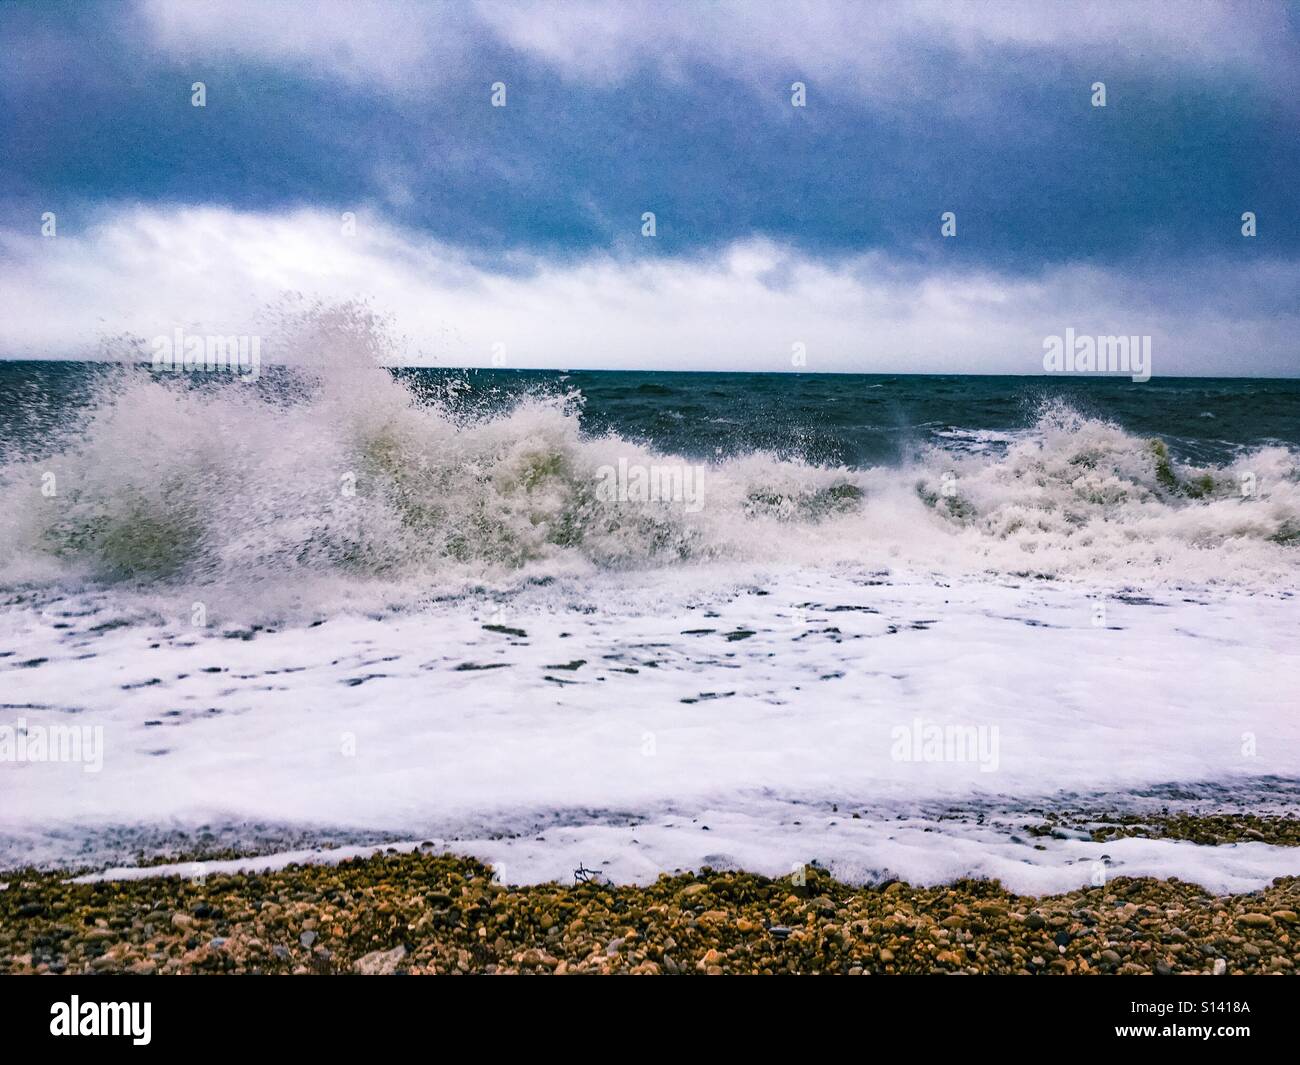 Waves breaking on beach with storm clouds above. Stock Photo